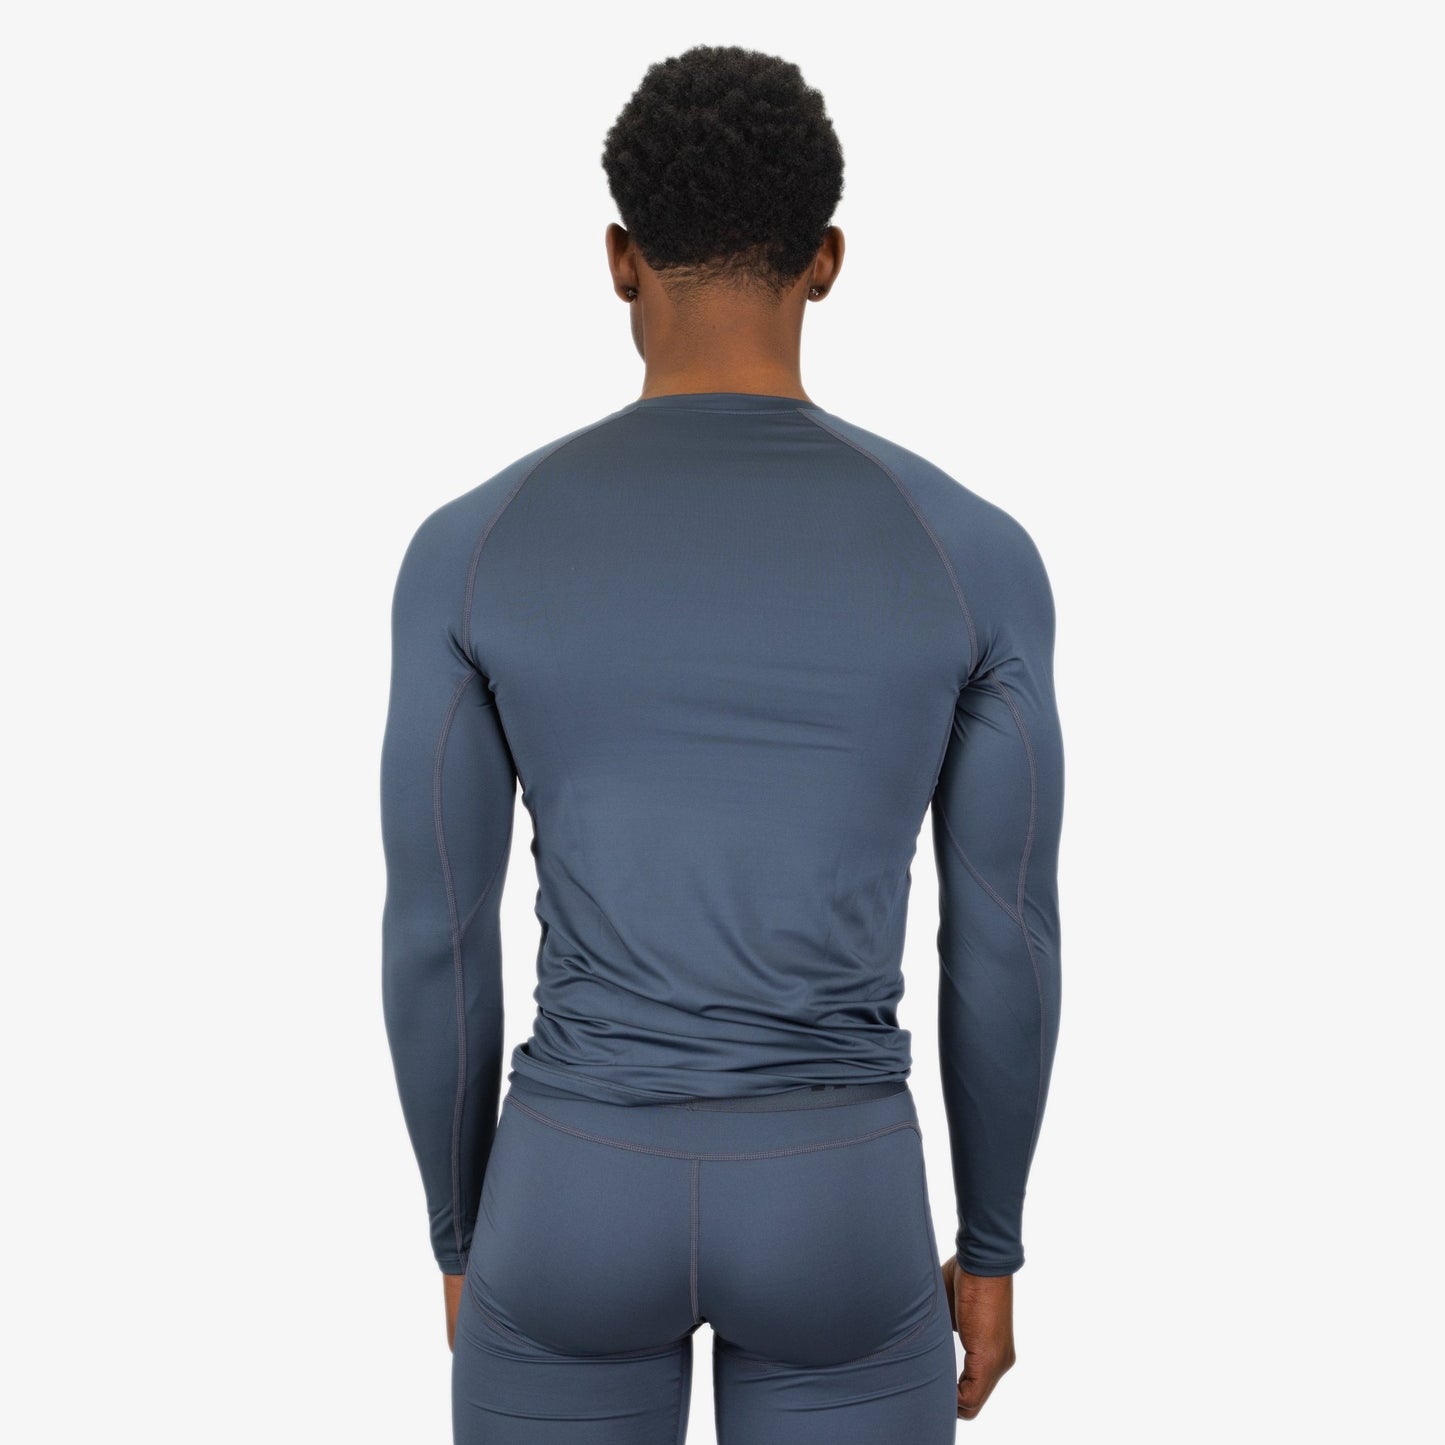 COMPRESSION LONG SLEEVE T-SHIRT (GREY) - We Ball Sports